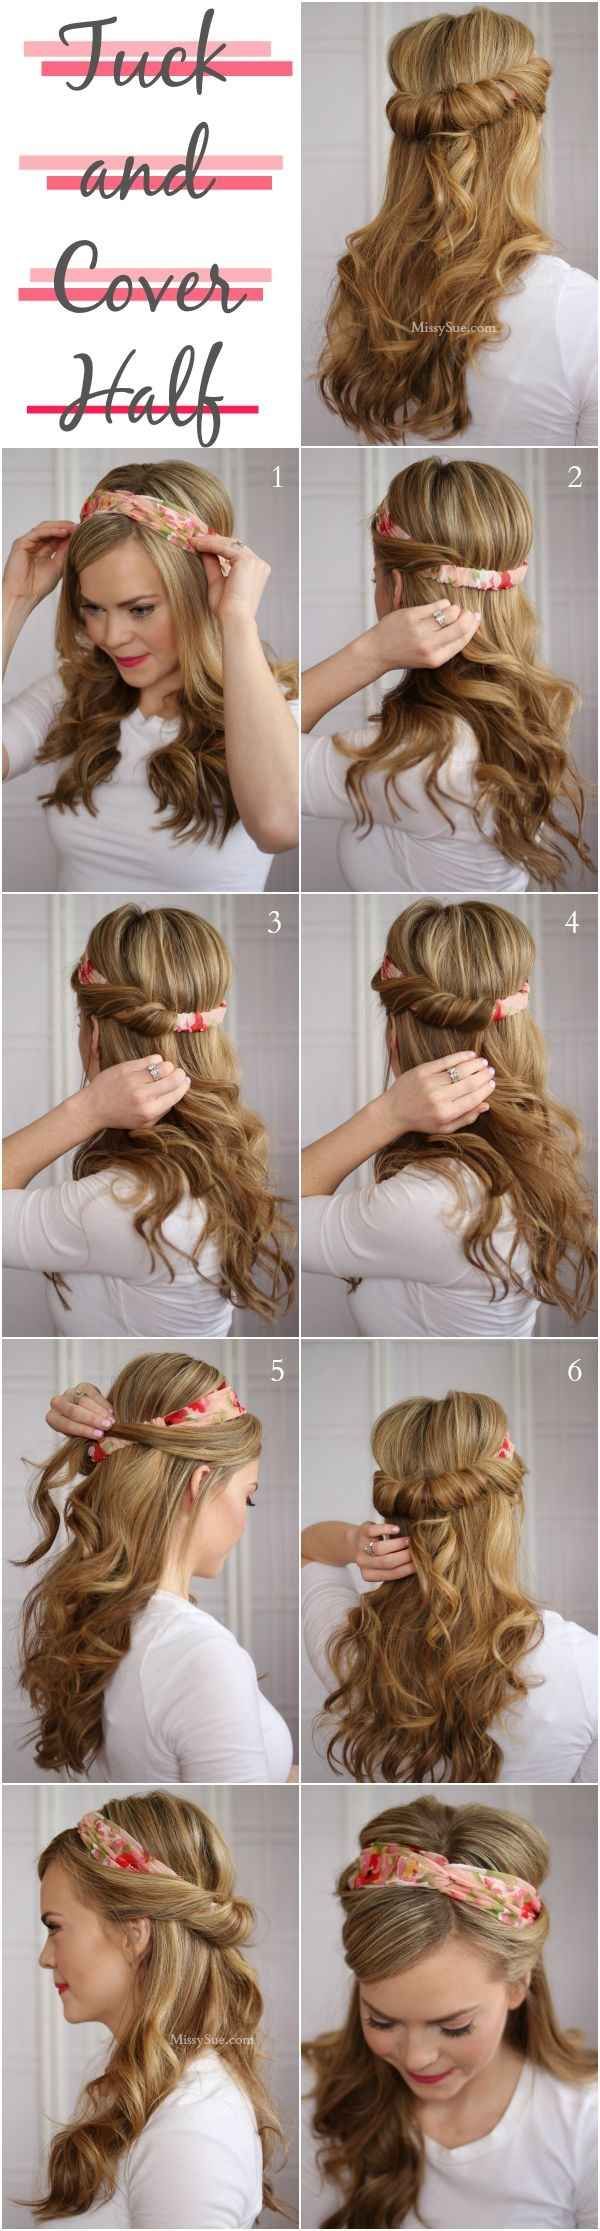 Half up Hairstyle